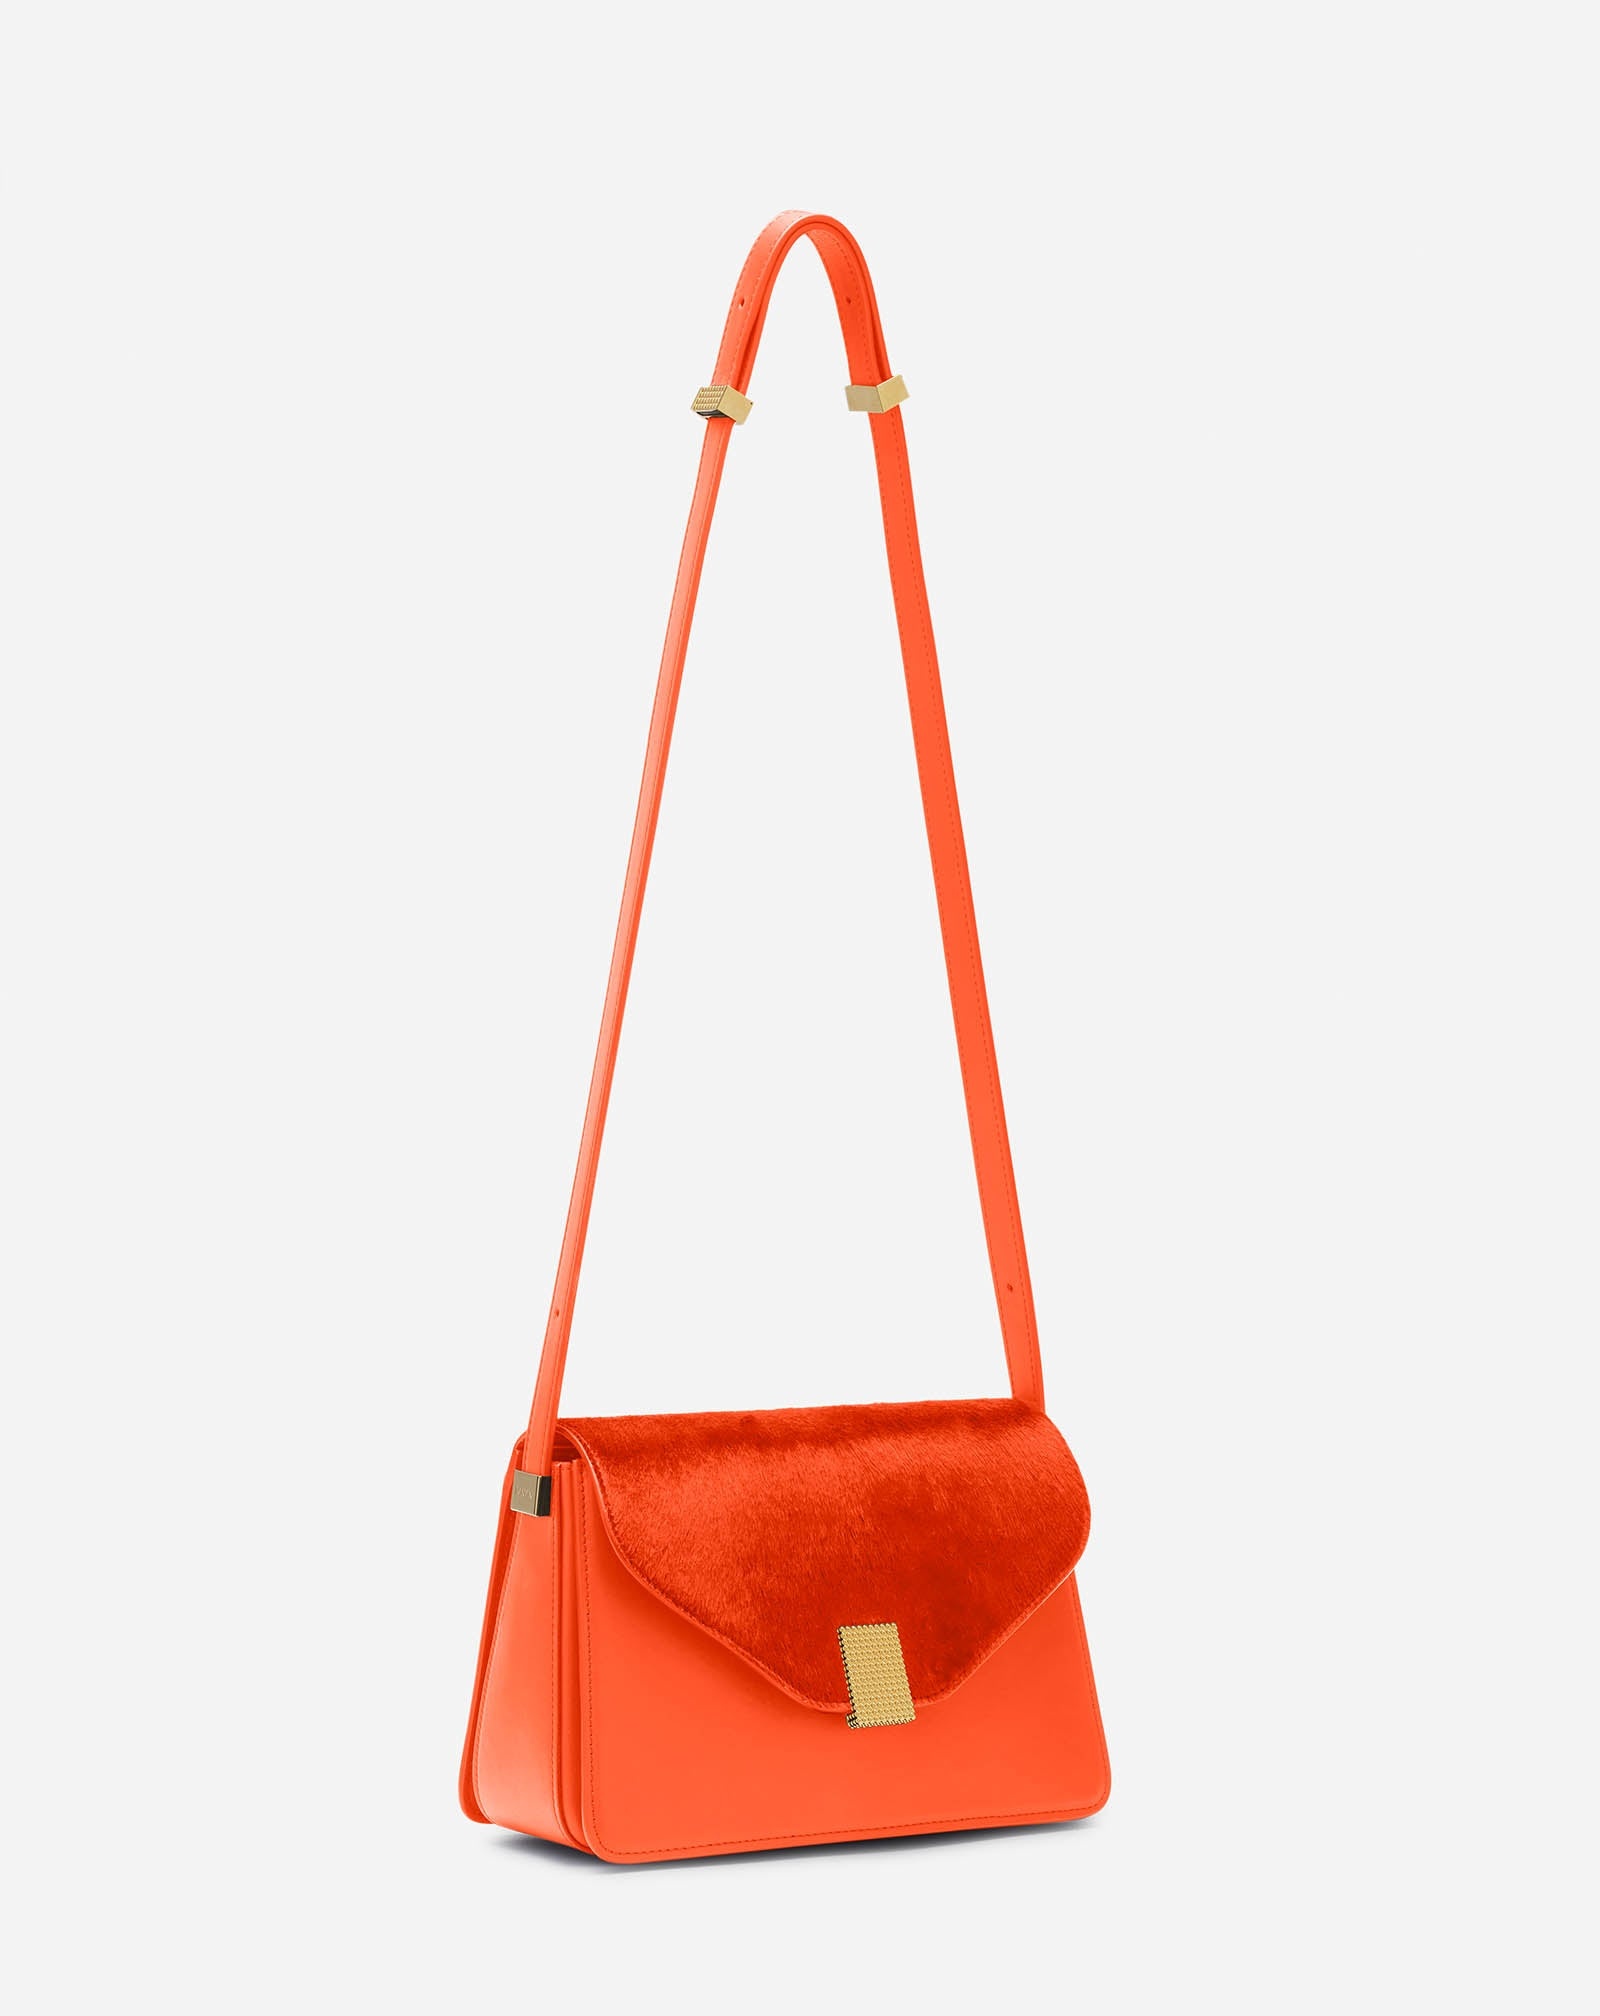 PM CONCERTO BAG IN PONY EFFECT LEATHER - 3